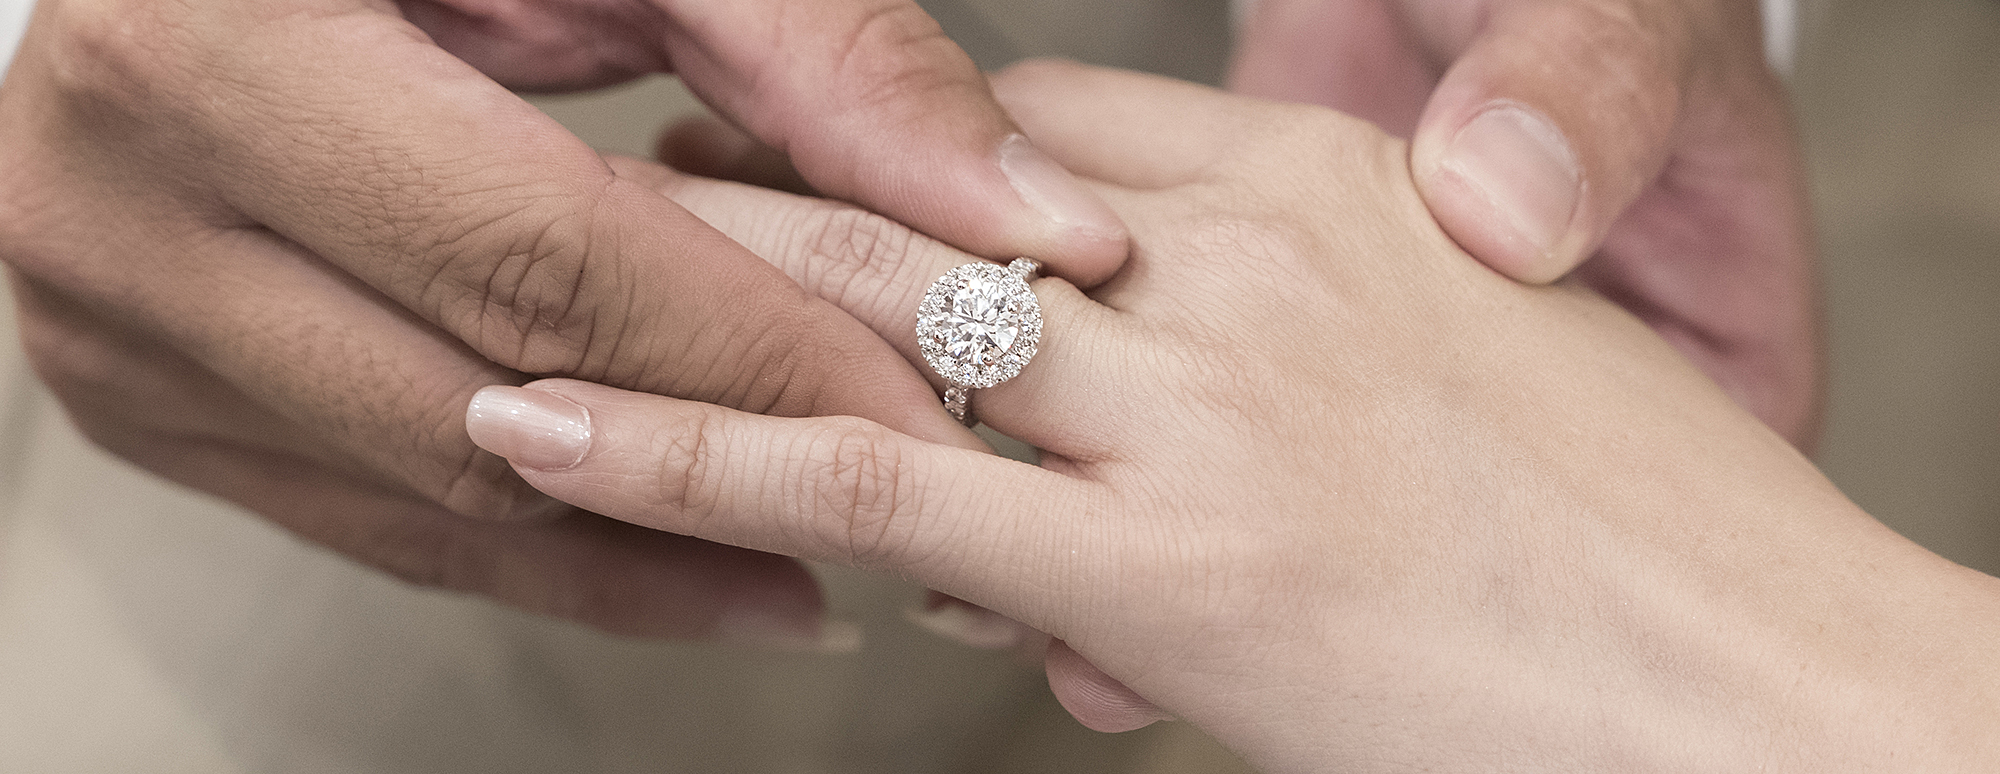 Engagement Rings 101: Everything You Need To Know | Pink Book